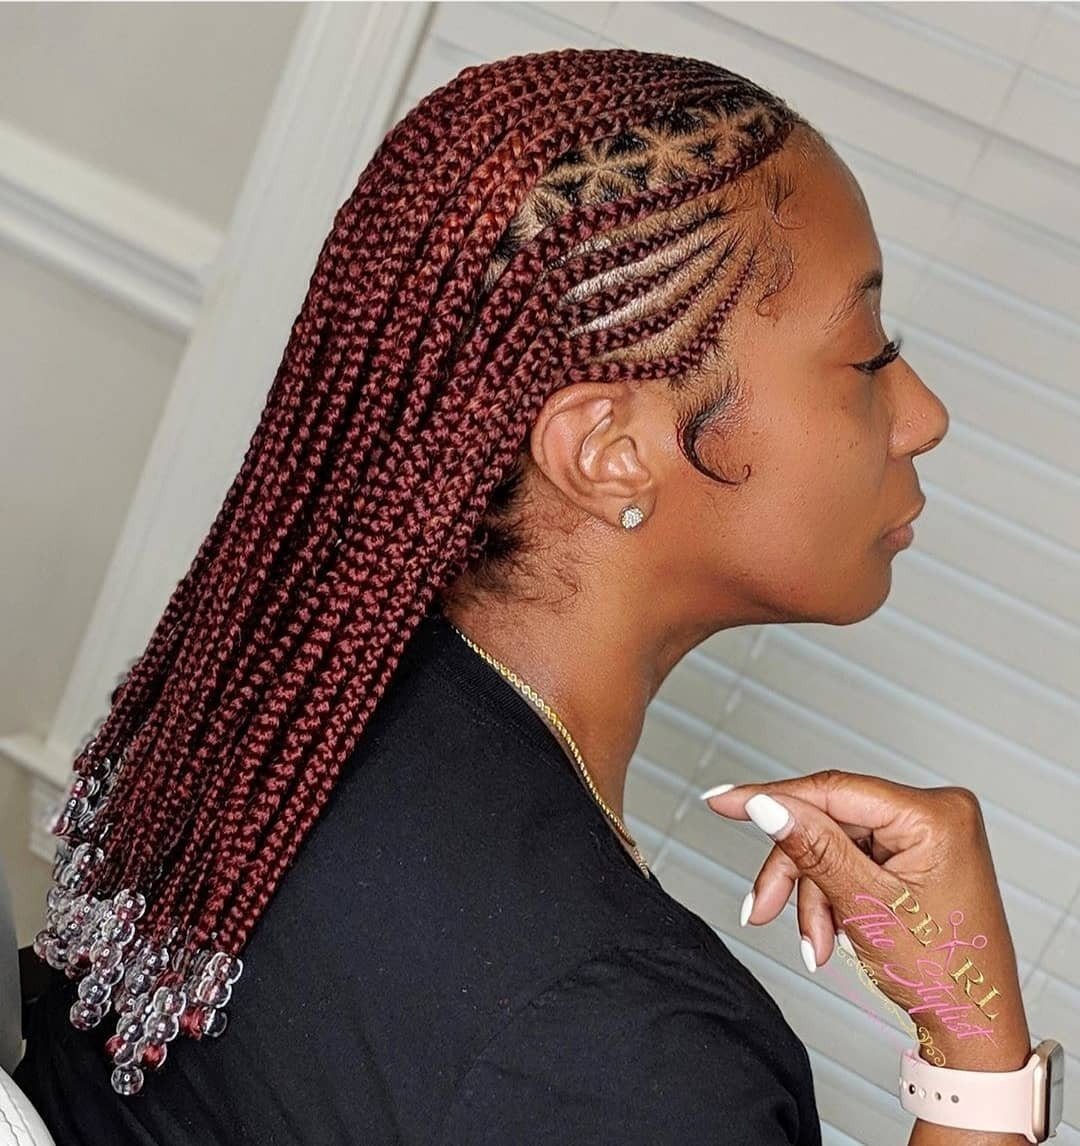 Braids Hairstyles 2020
 2020 Braided Hairstyles That Are Totally Hip and Cute